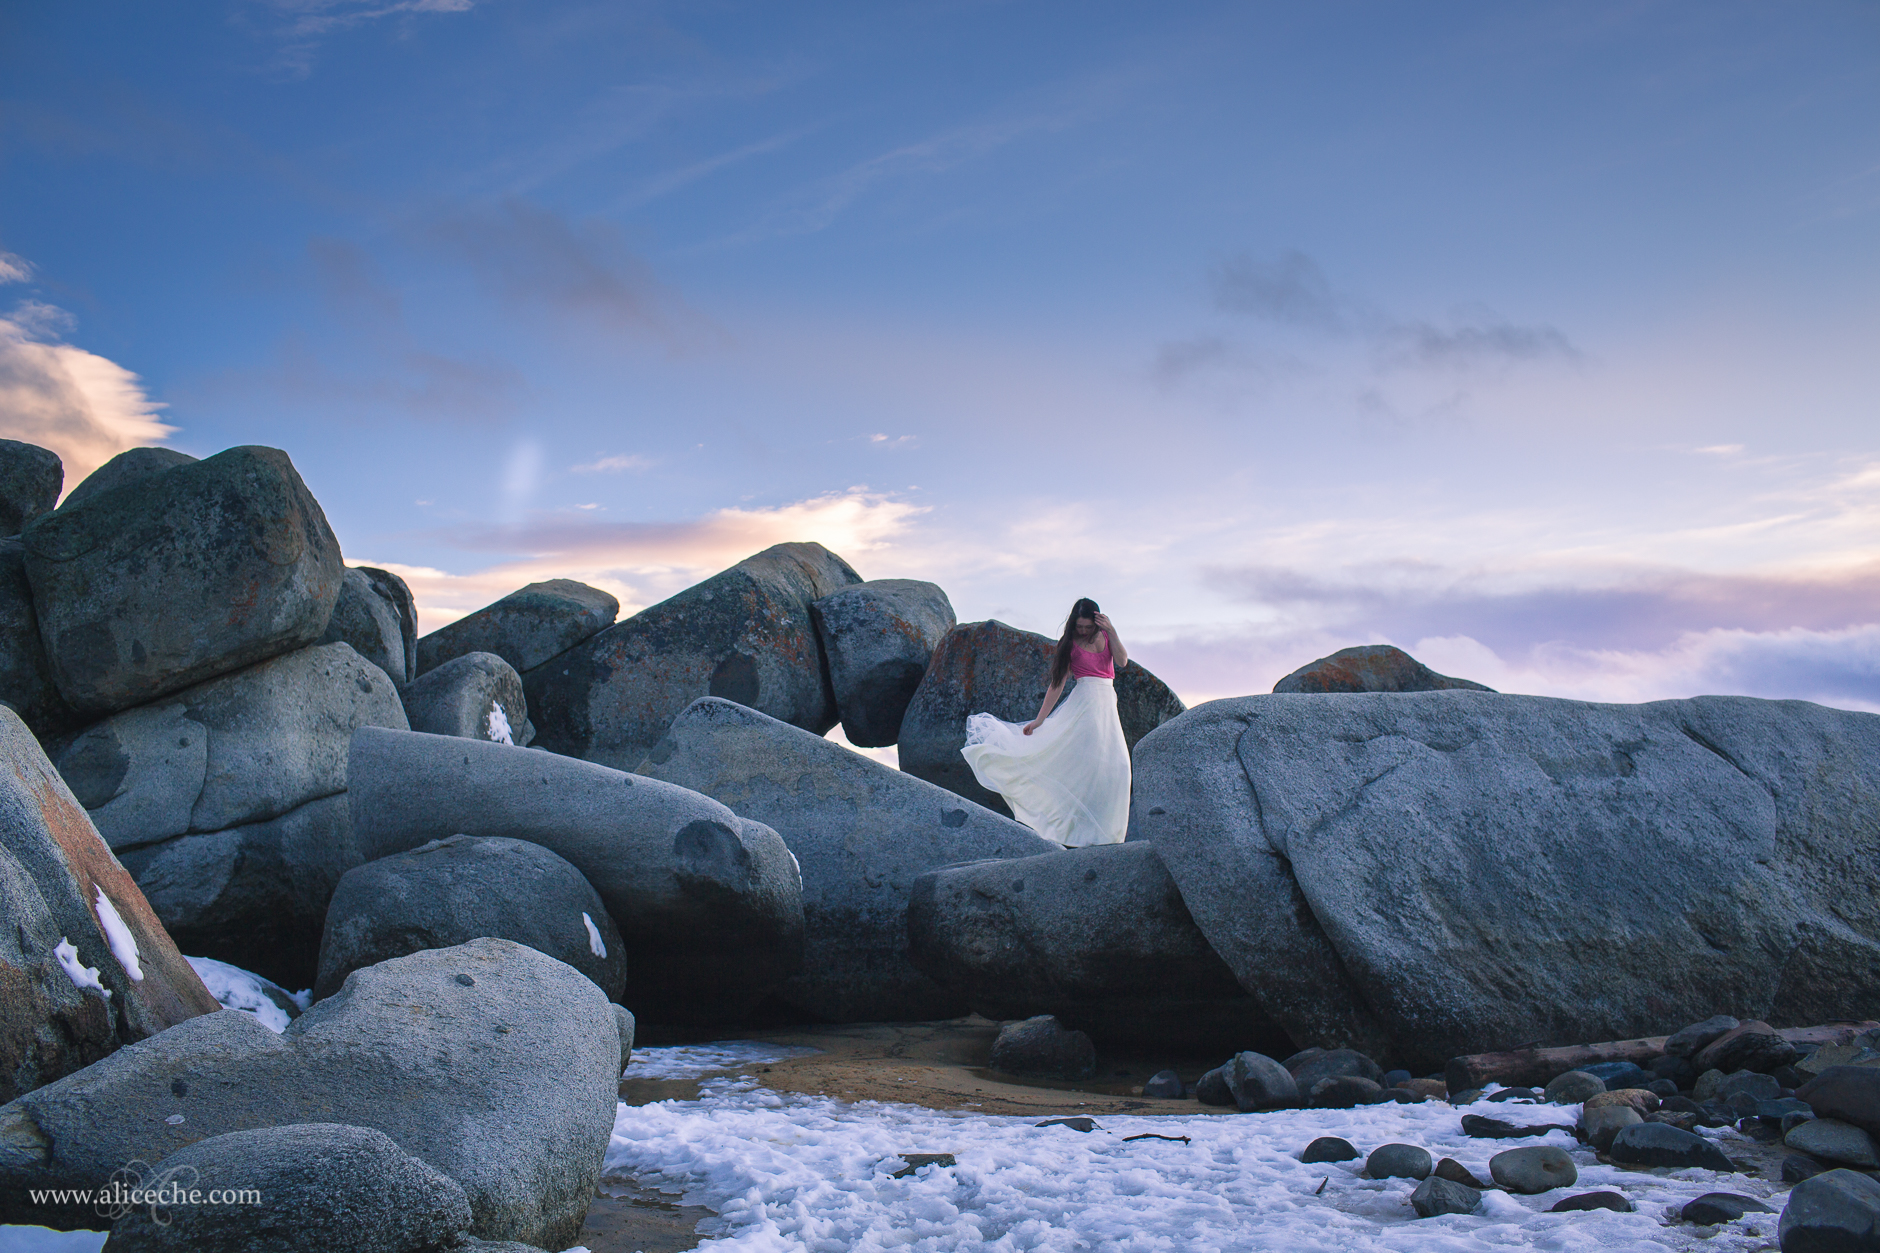 alice-che-photography-lake-tahoe-self-portrait-sunset-dancing-on-rocks-in-tulle-skirt-snow